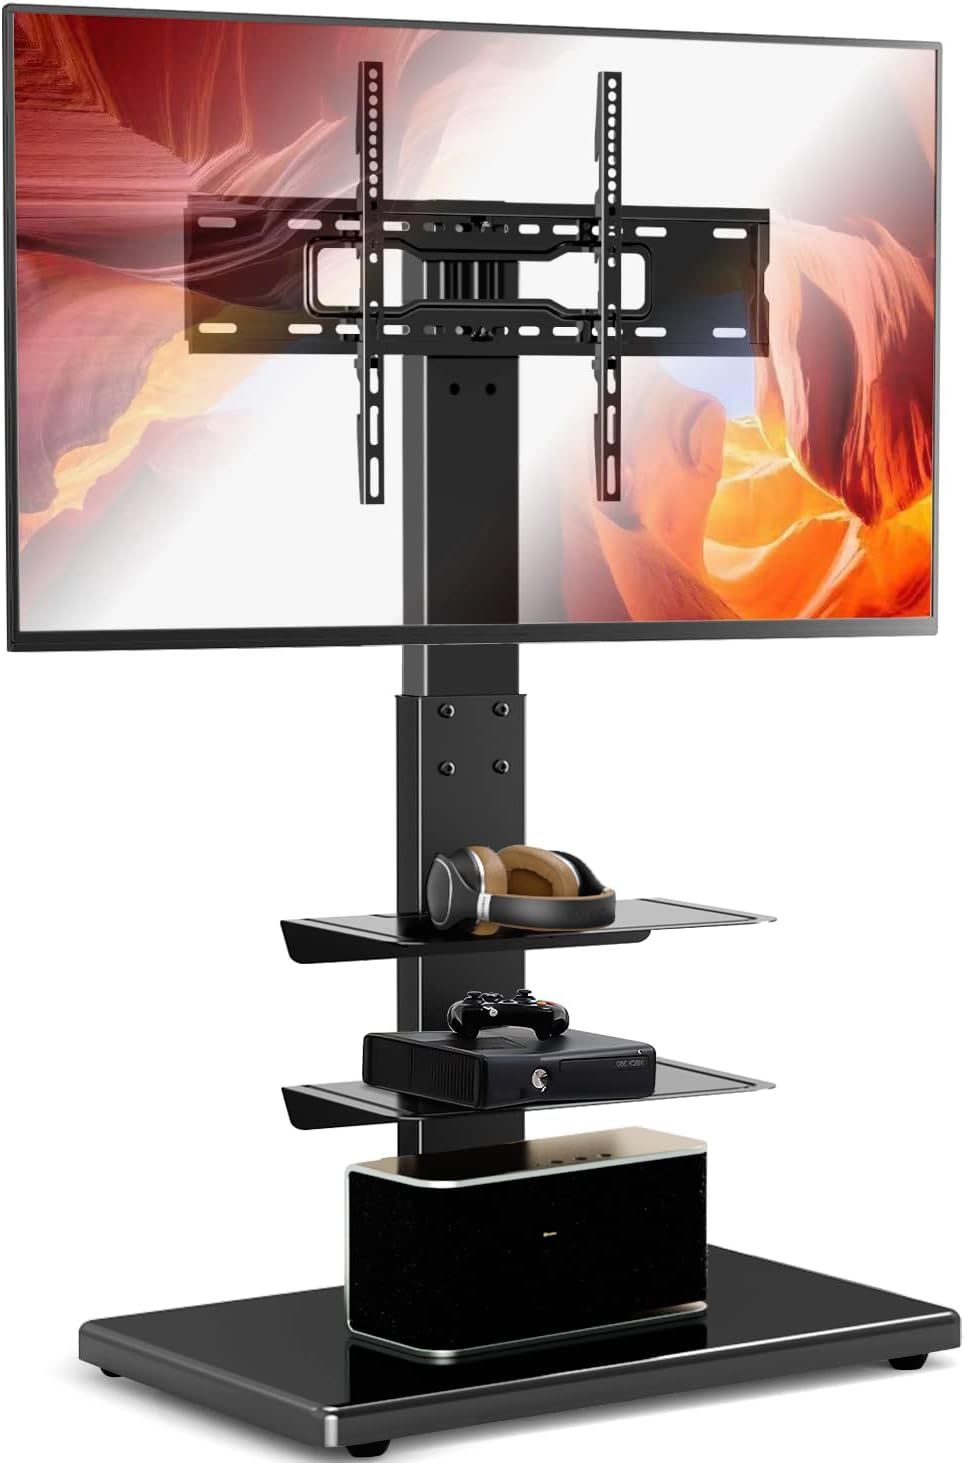 Yomt Floor Tv Stand With Sturdy Wood Base, Tall India | Ubuy Inside Universal Floor Tv Stands (View 6 of 15)